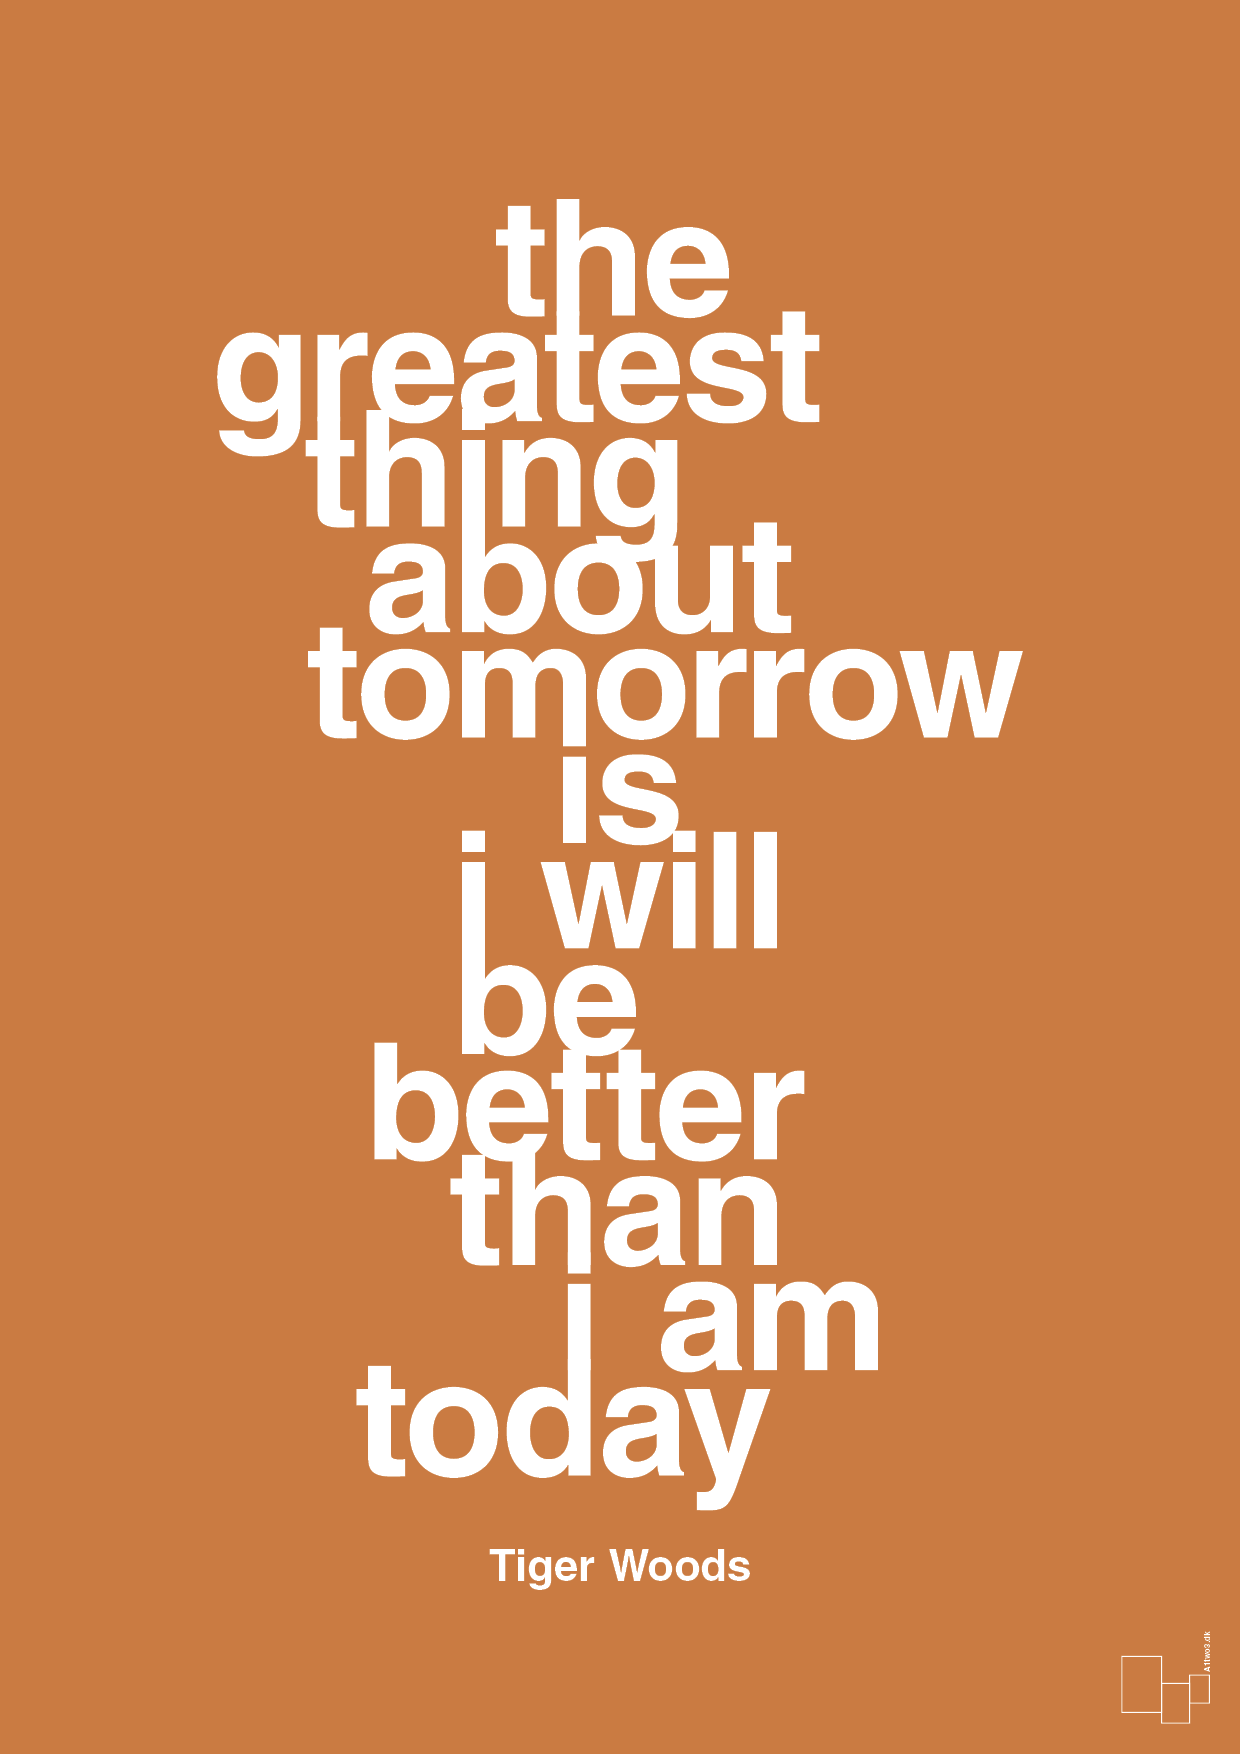 the greatest thing about tomorrow is i will be better than i am today - Plakat med Citater i Rumba Orange